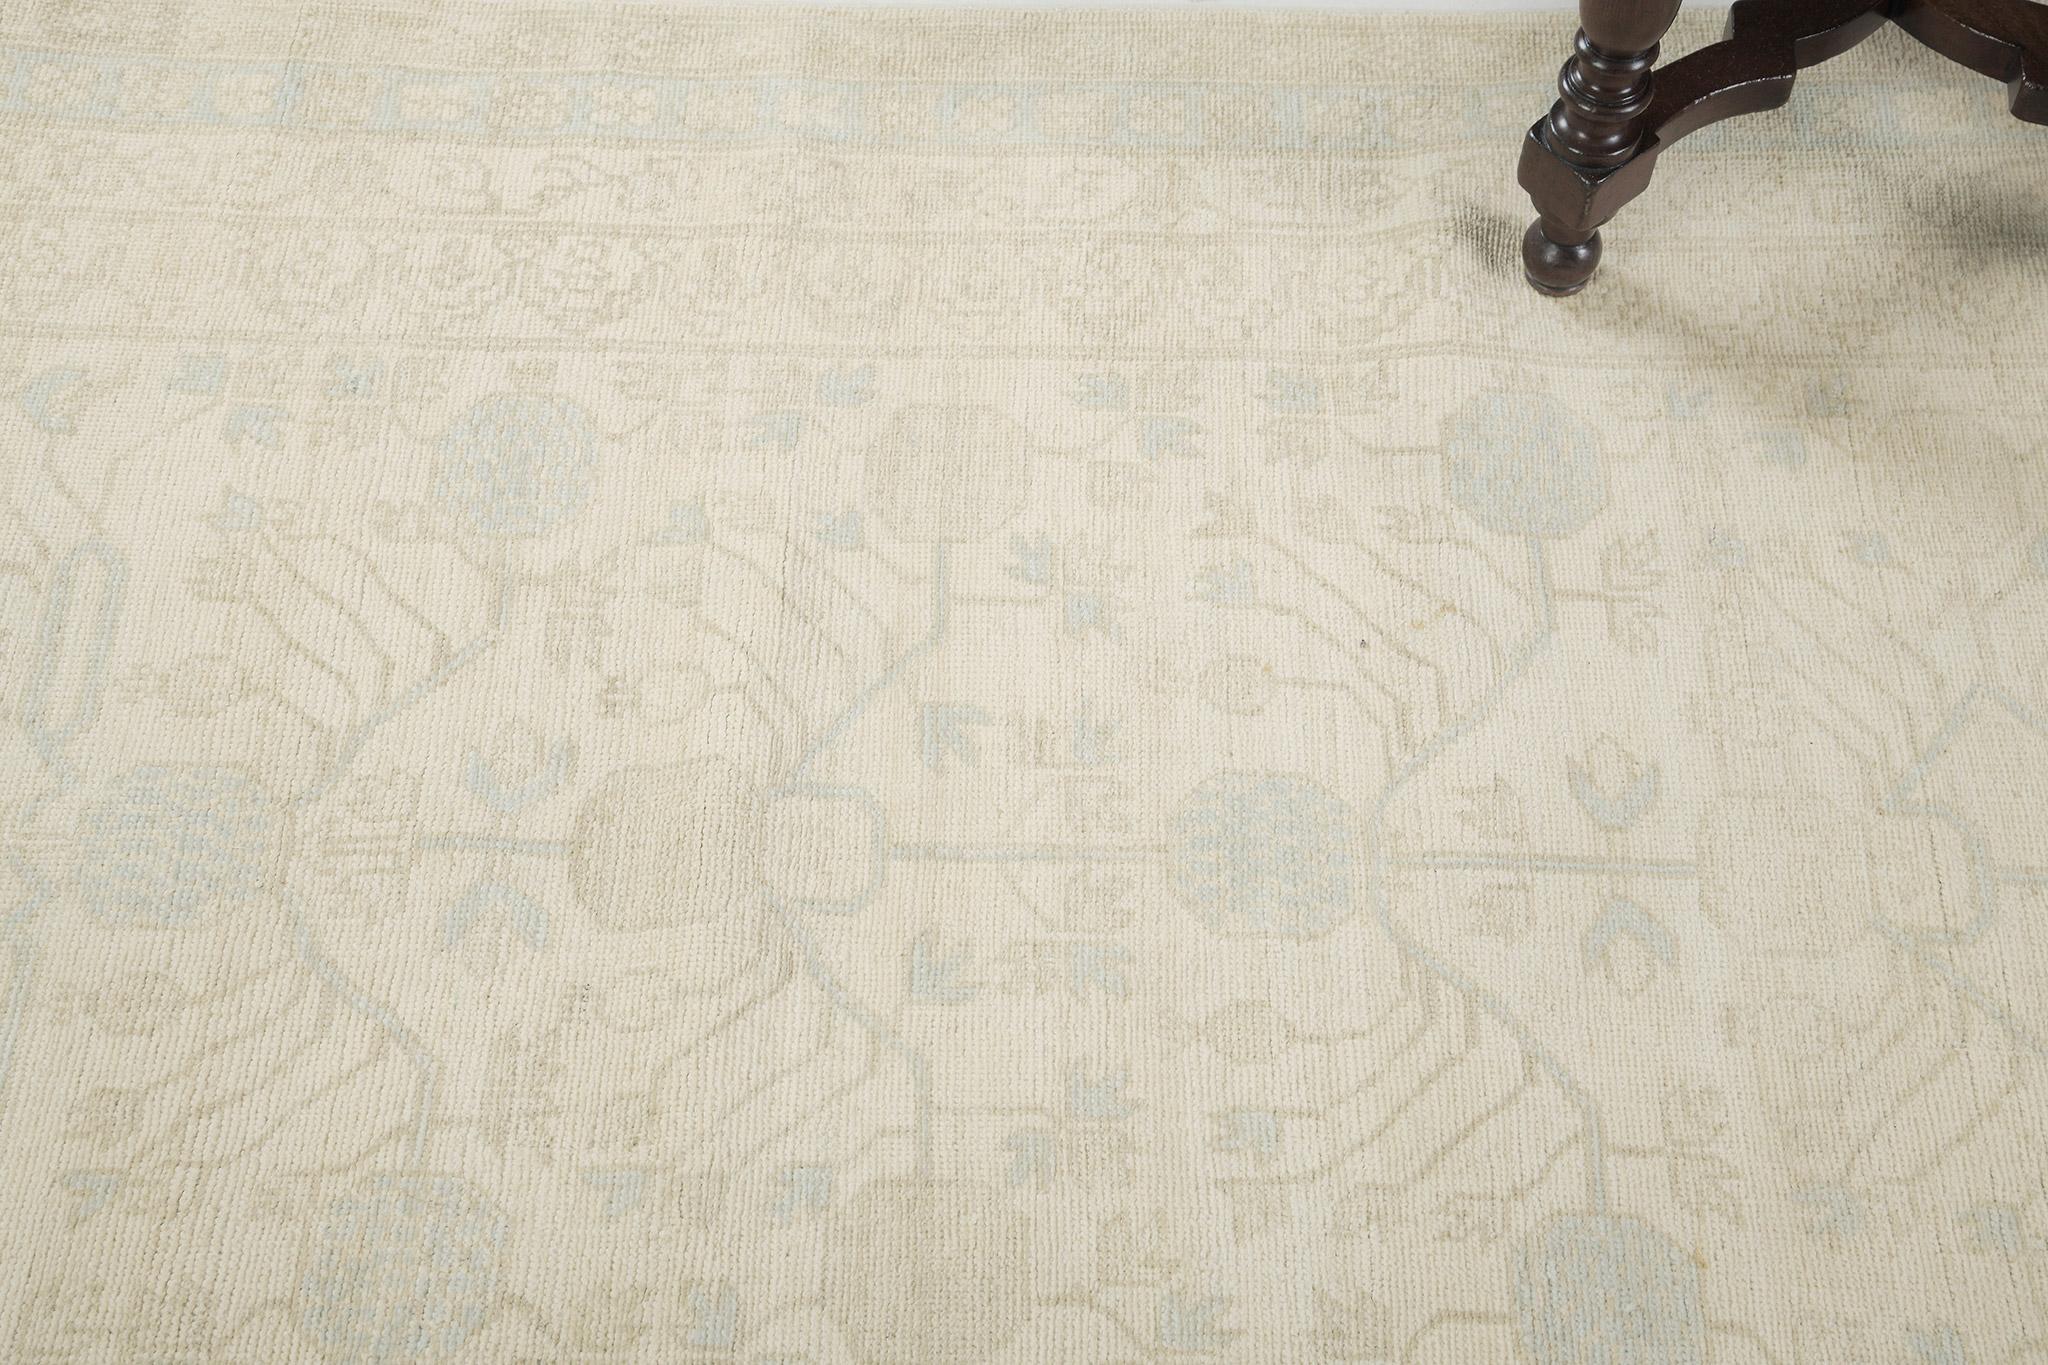 When curled pattern bands are featured, this runner is flexible for any home interior decor and promising for desired spaces. Patterned-positioned pomegranates and ornaments in earth tones lead the entire pattern of the runner. An impressive